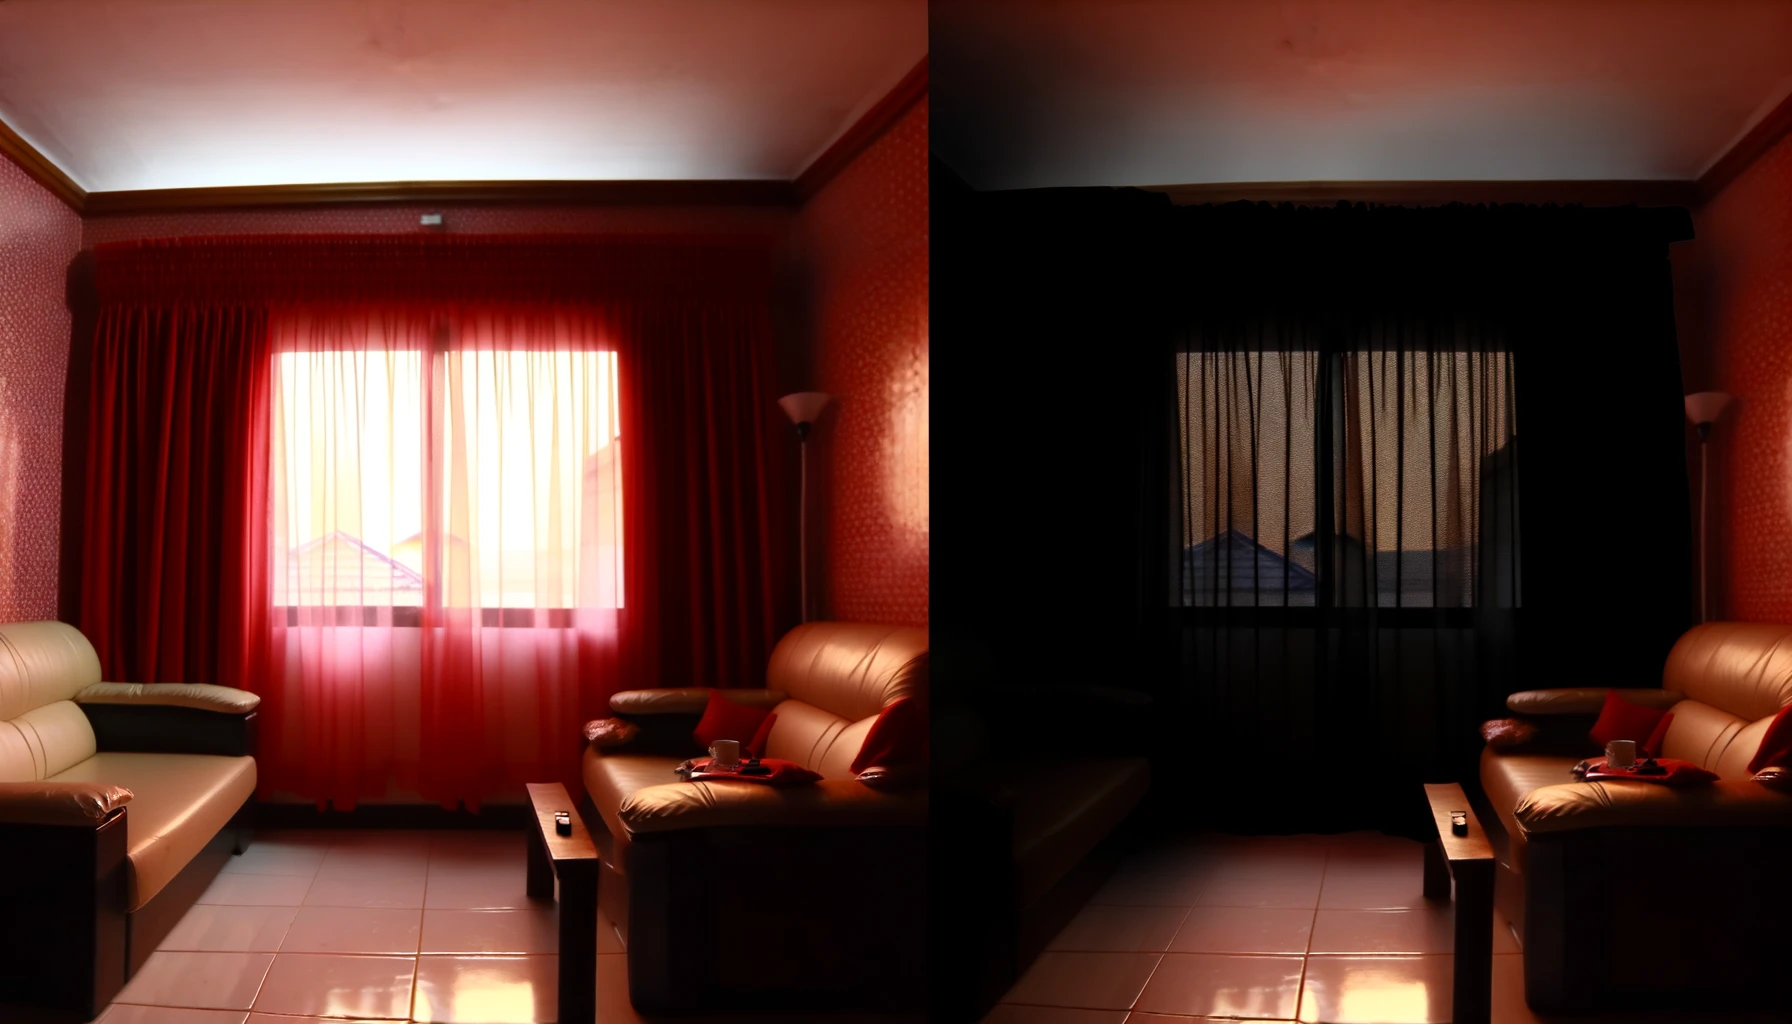 Translucent red curtains allow a soft light to glow on the left, while opaque black curtains create darkness on the right.